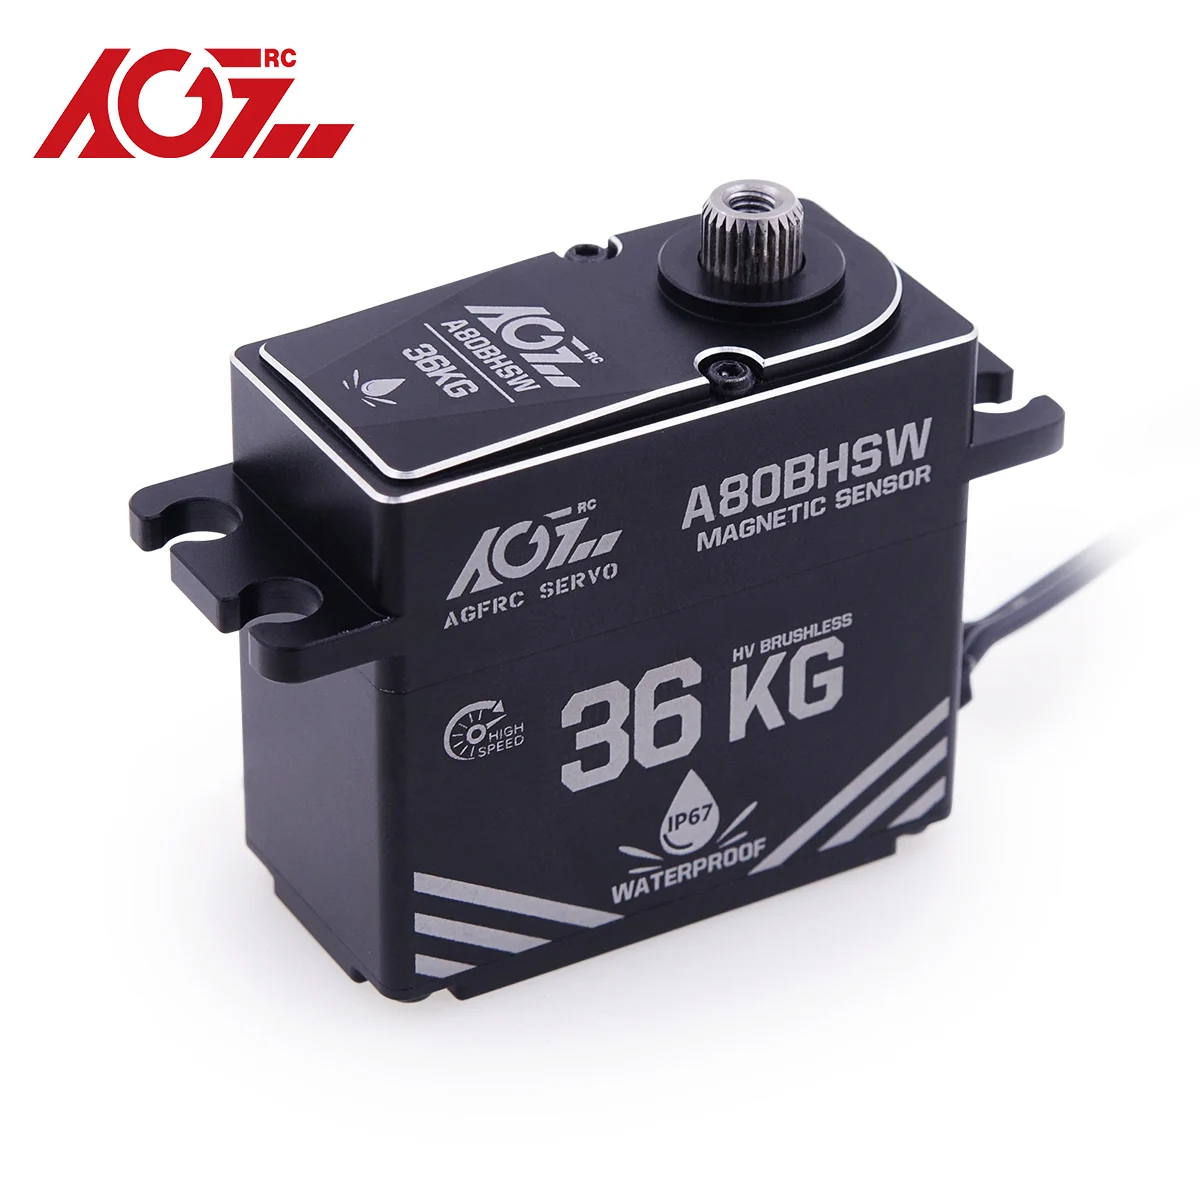 Special Offer -AGFRC A80BHSW HV 36KG Torque 0.071Sec Waterproof IP67 Brushless - £124.77 GBP